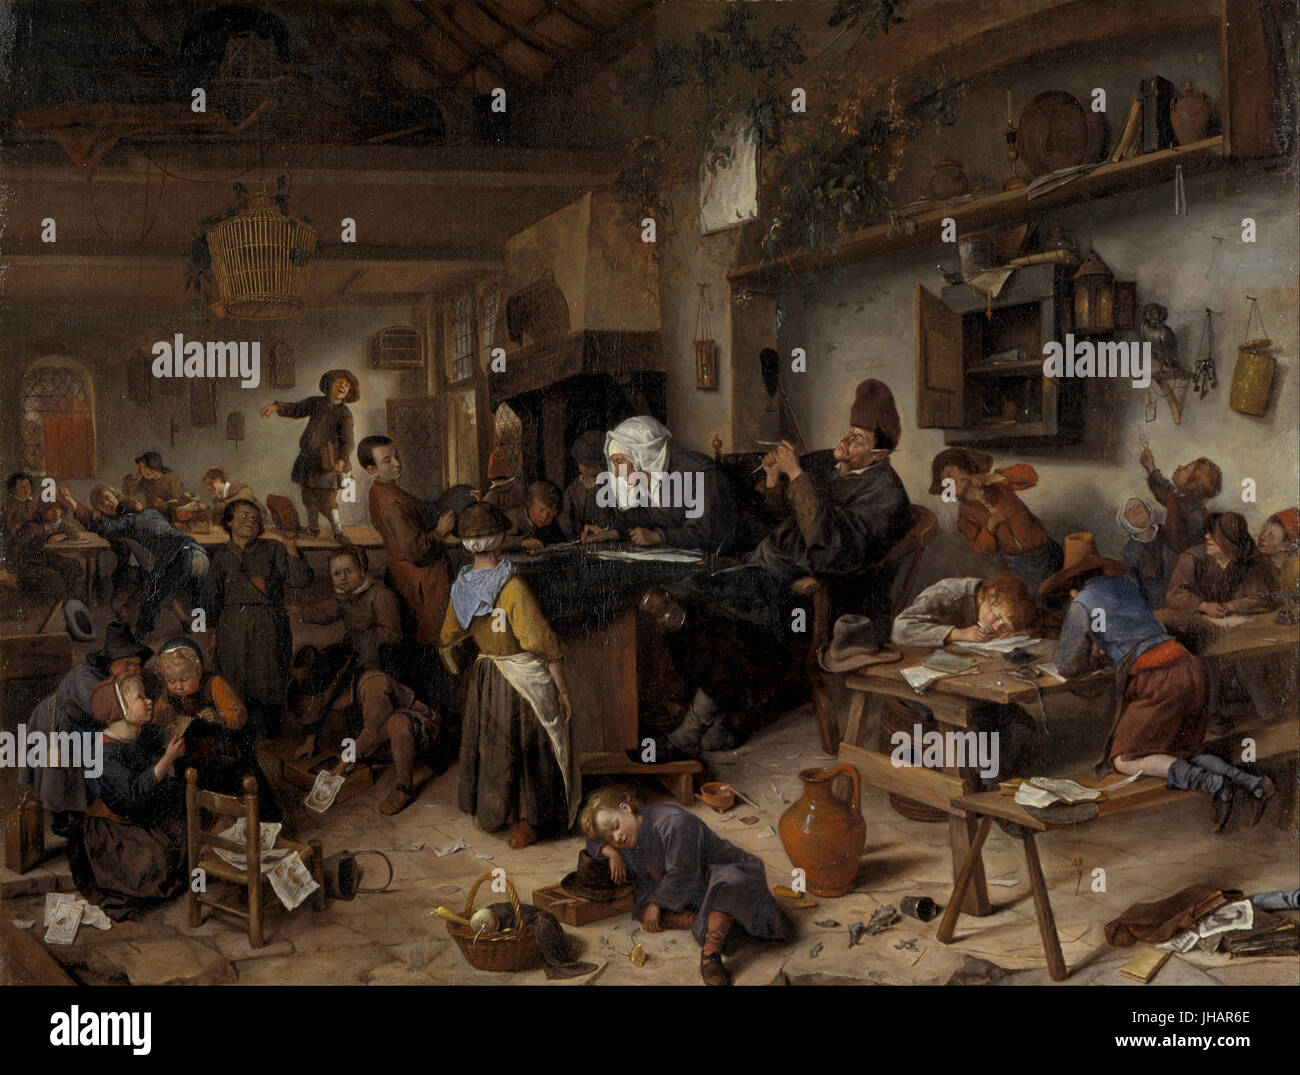 Jan Steen - A School for Boys and Girls - Stock Photo